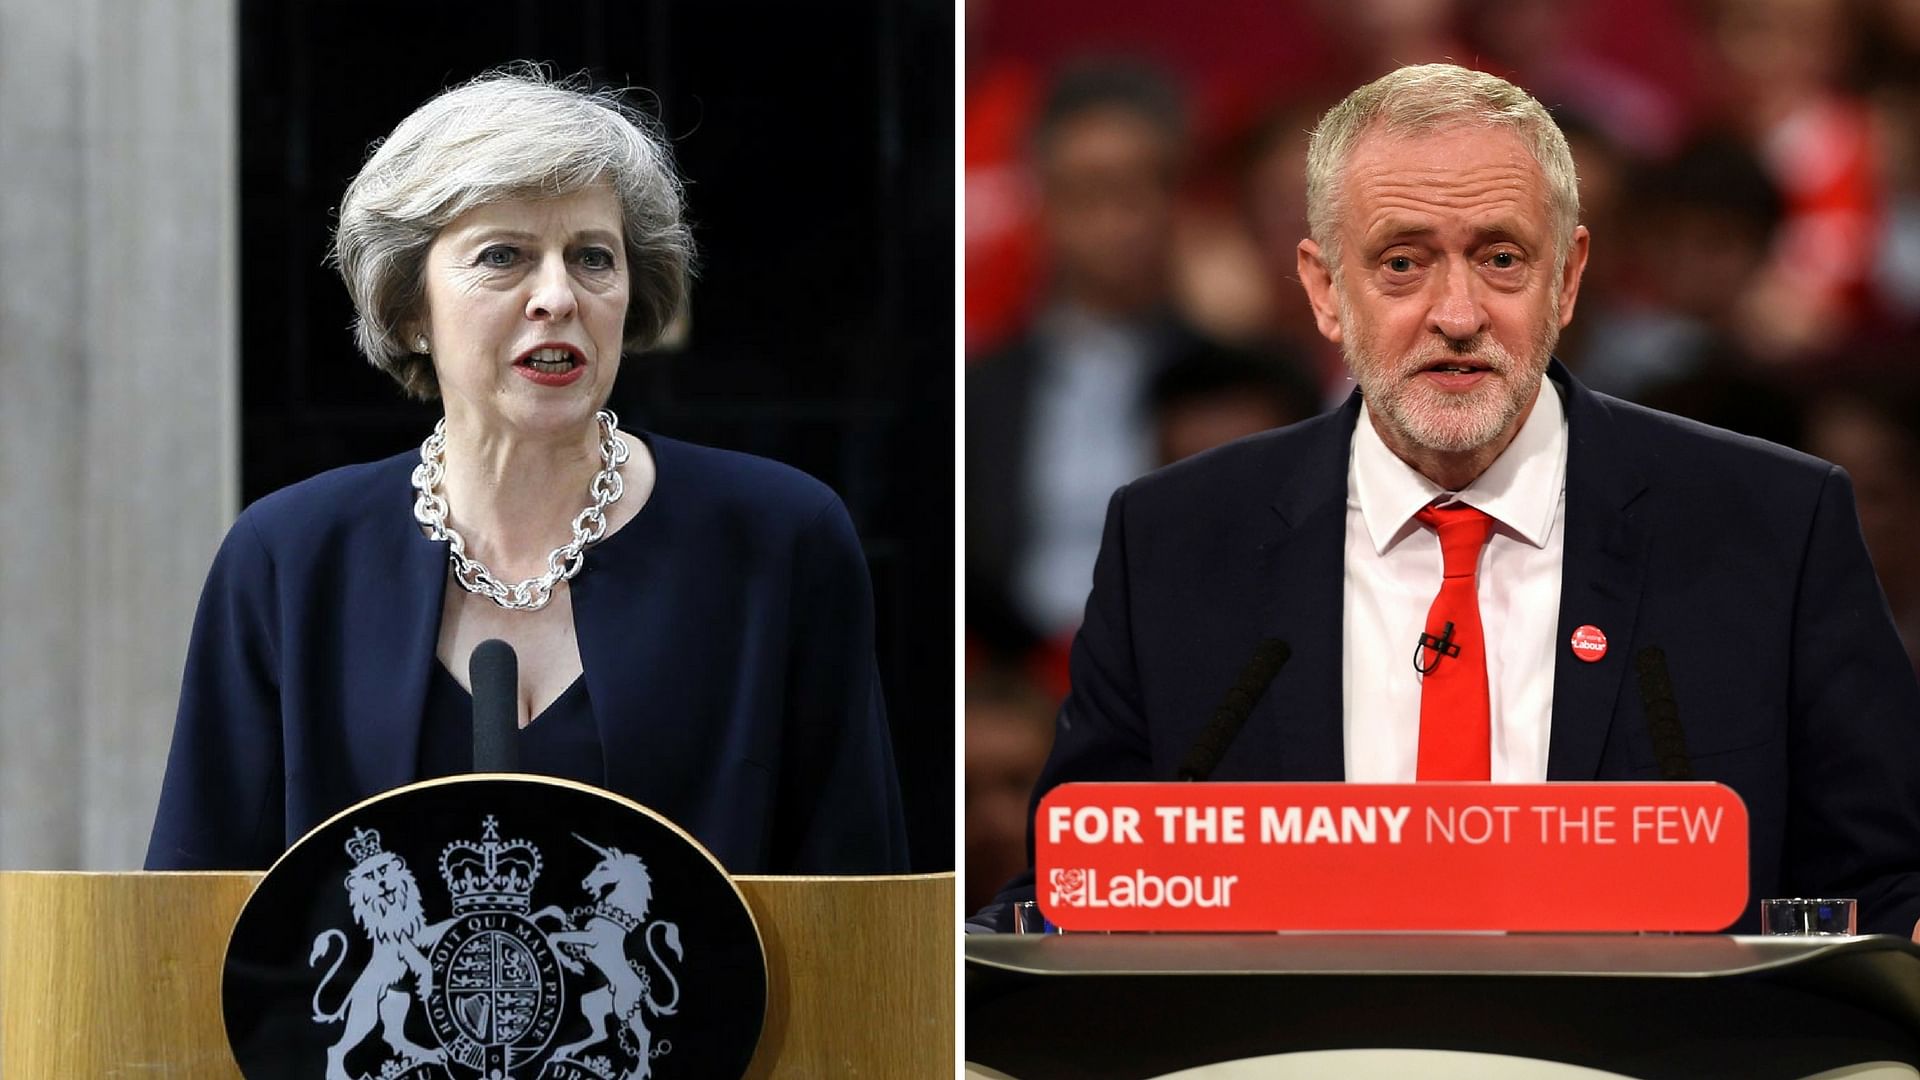 British Prime Minister Theresa May and Labour Party leader Jeremy Corbyn.